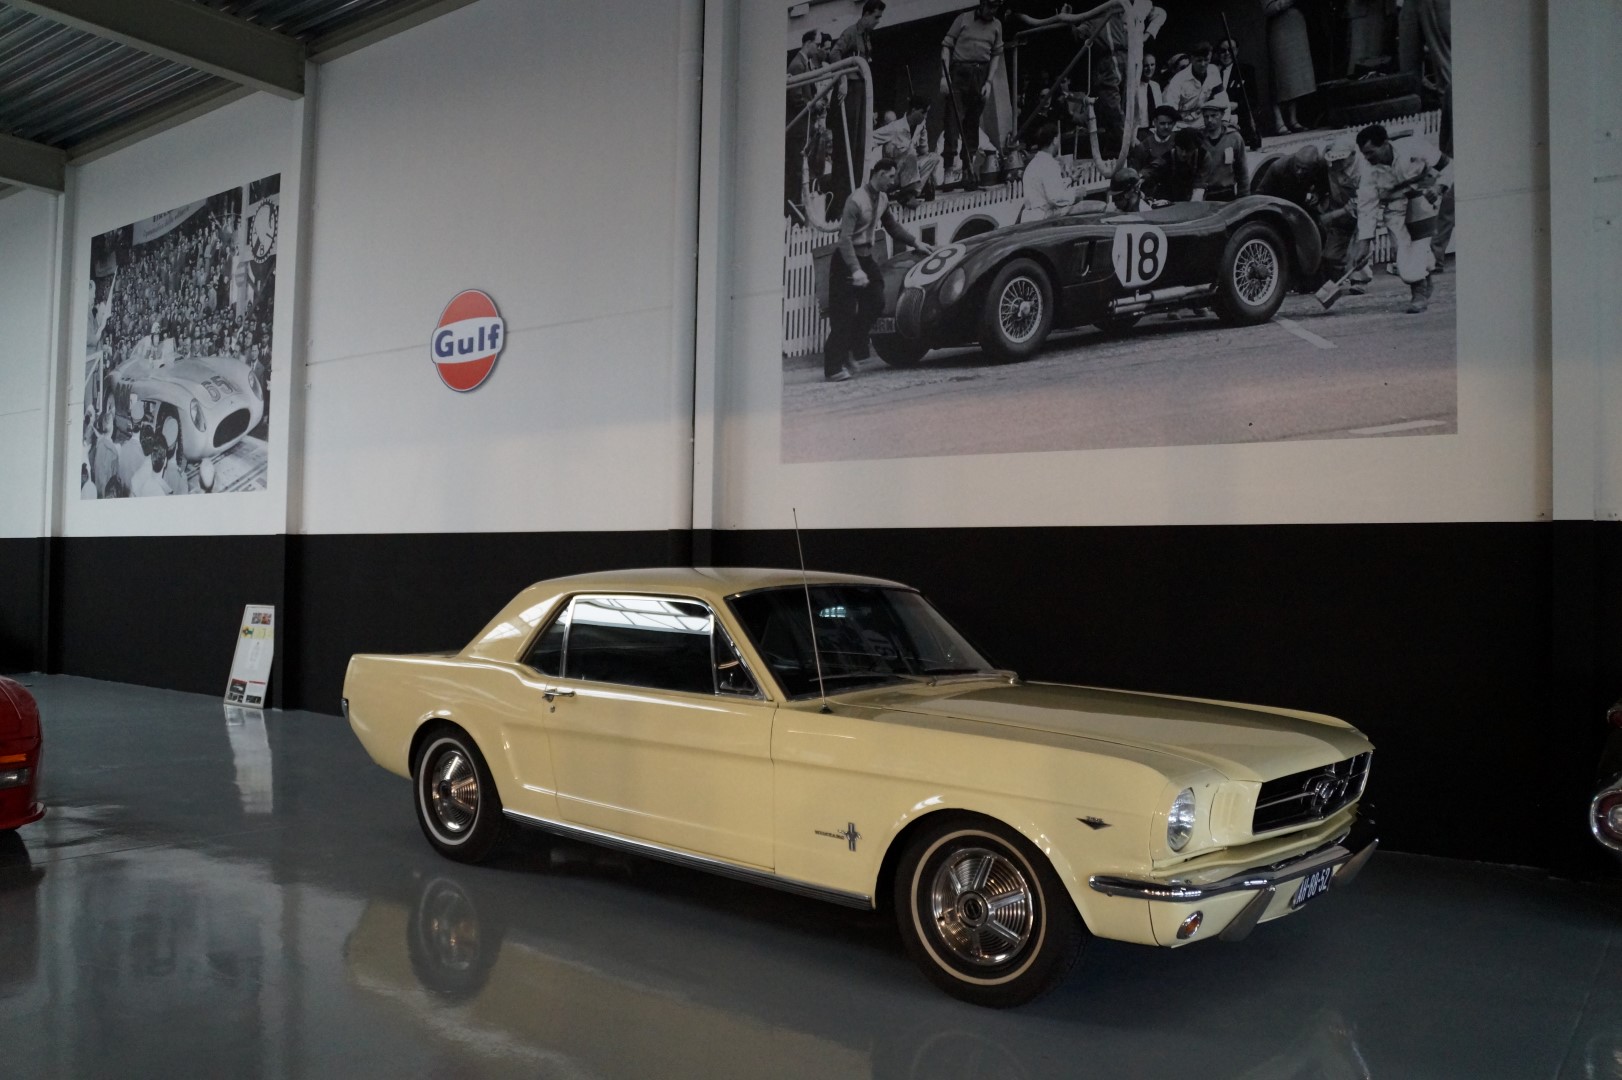 Buy this Ford Mustang   at Legendary Classics